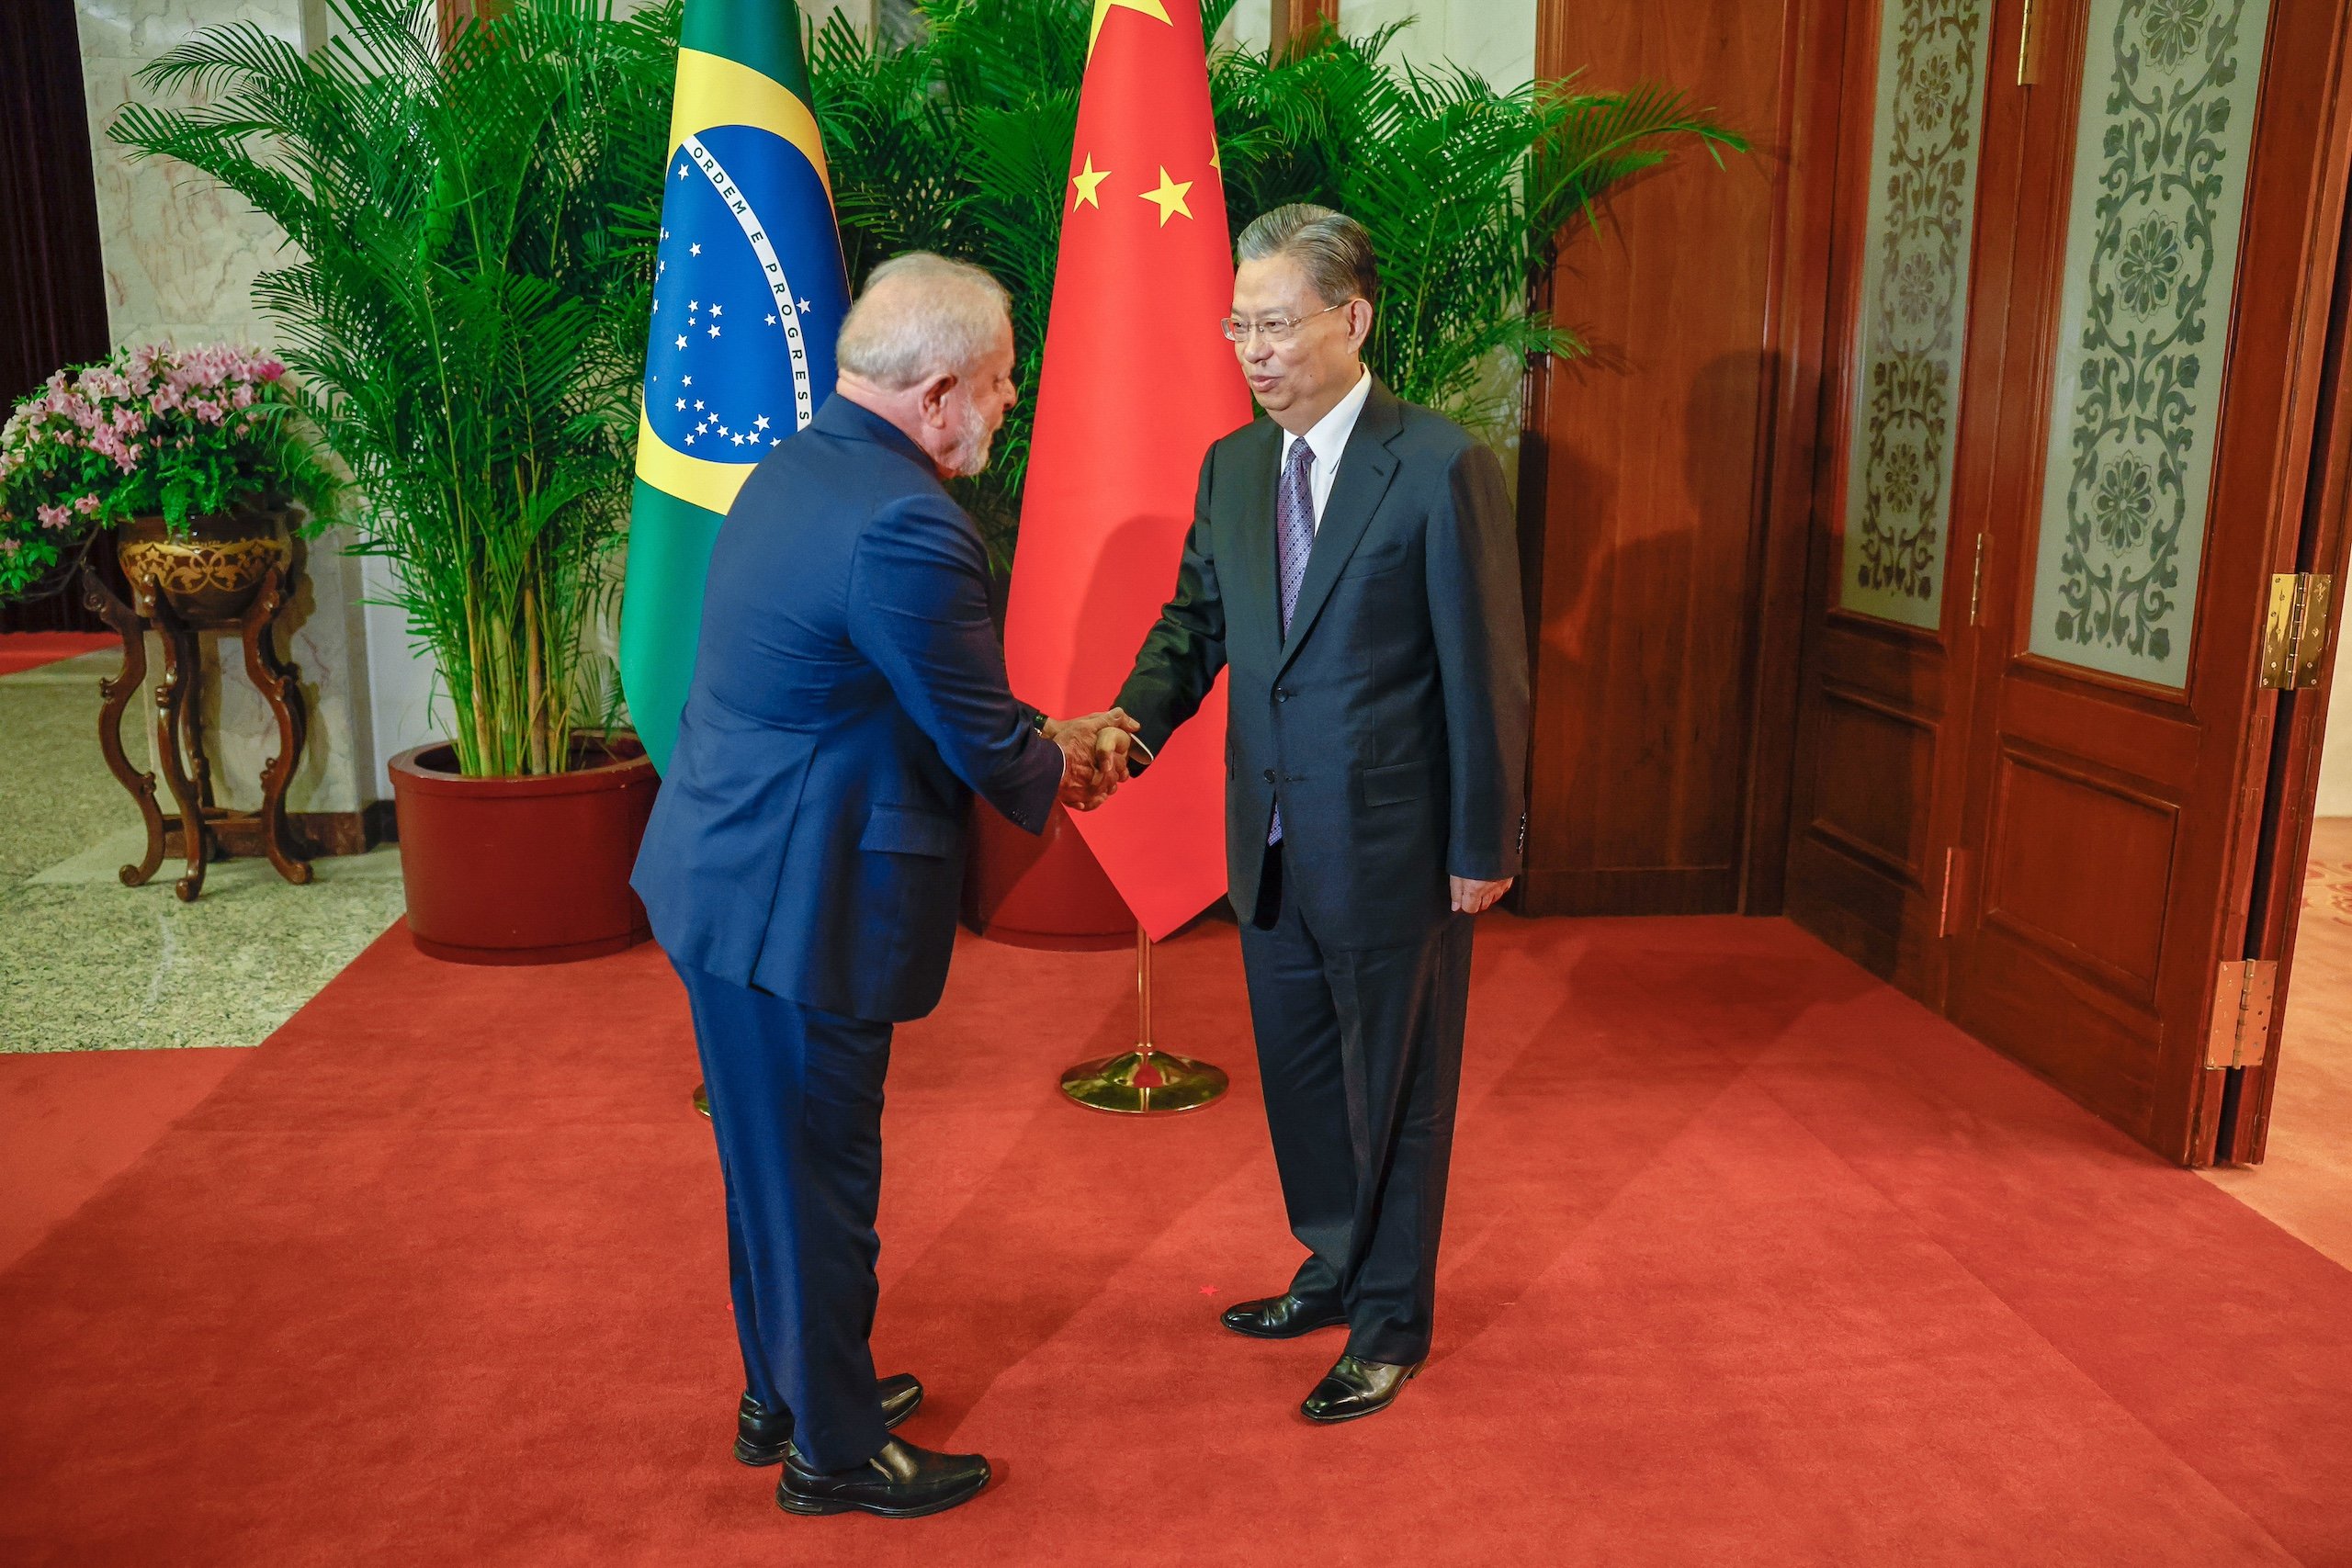 <p>President Lula greets Zhao Leji, President of the People&#8217;s Assembly of China, in Beijing. During the Brazilian leader&#8217;s visit to China in April 2023, the governments signed a commitment to expand their joint green agenda. (Image: <a href="https://flic.kr/p/2otbMLo">Ricardo Stuckert</a> / <a href="https://flic.kr/p/2otbMLo">Palácio do Planalto</a>, <a href="https://creativecommons.org/licenses/by/2.0/">CC BY</a>)</p>